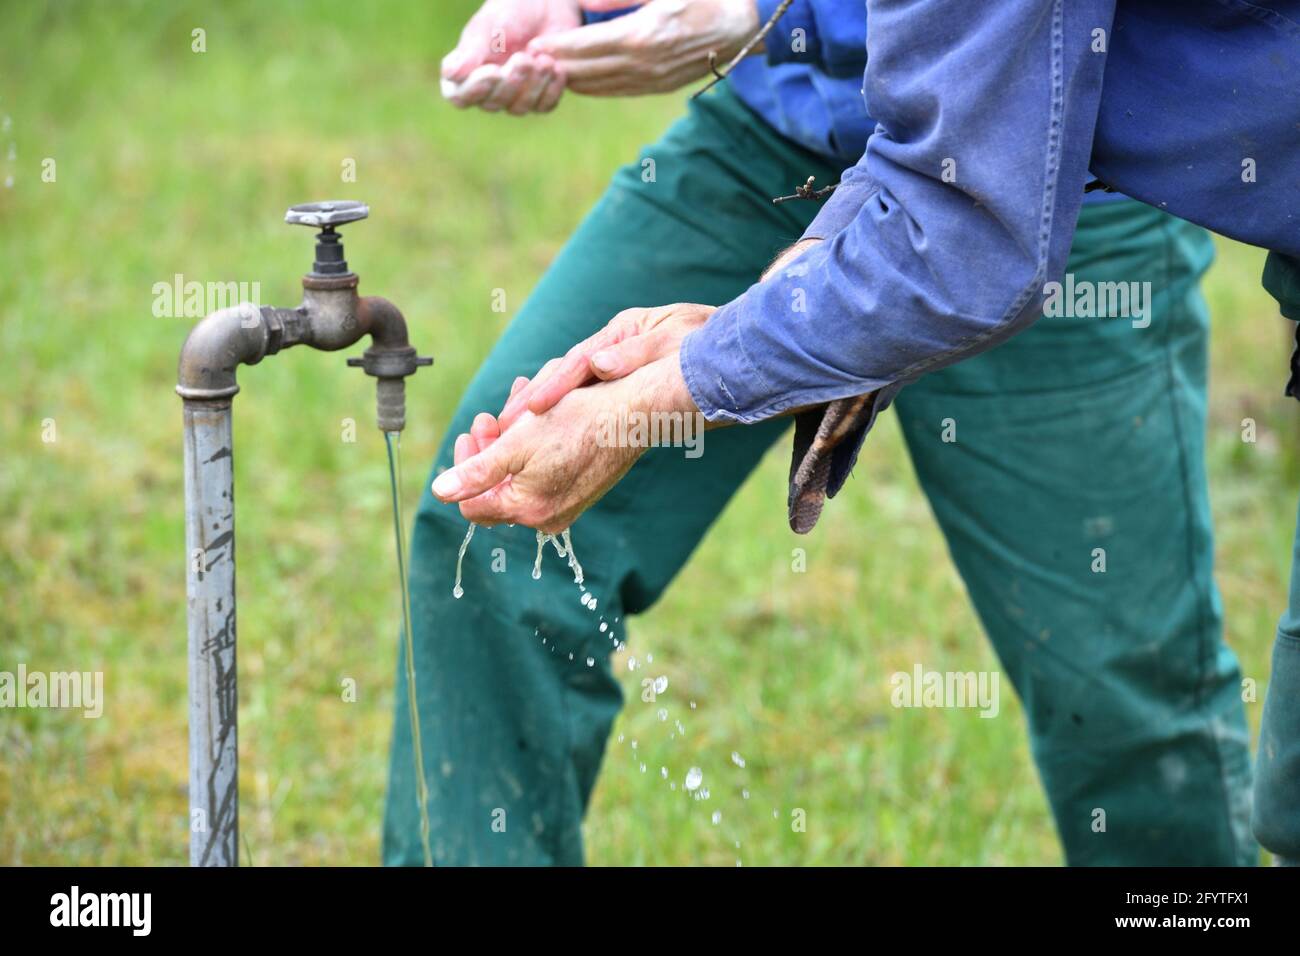 Washing hands on a green meadow from the water supply of a well Stock Photo